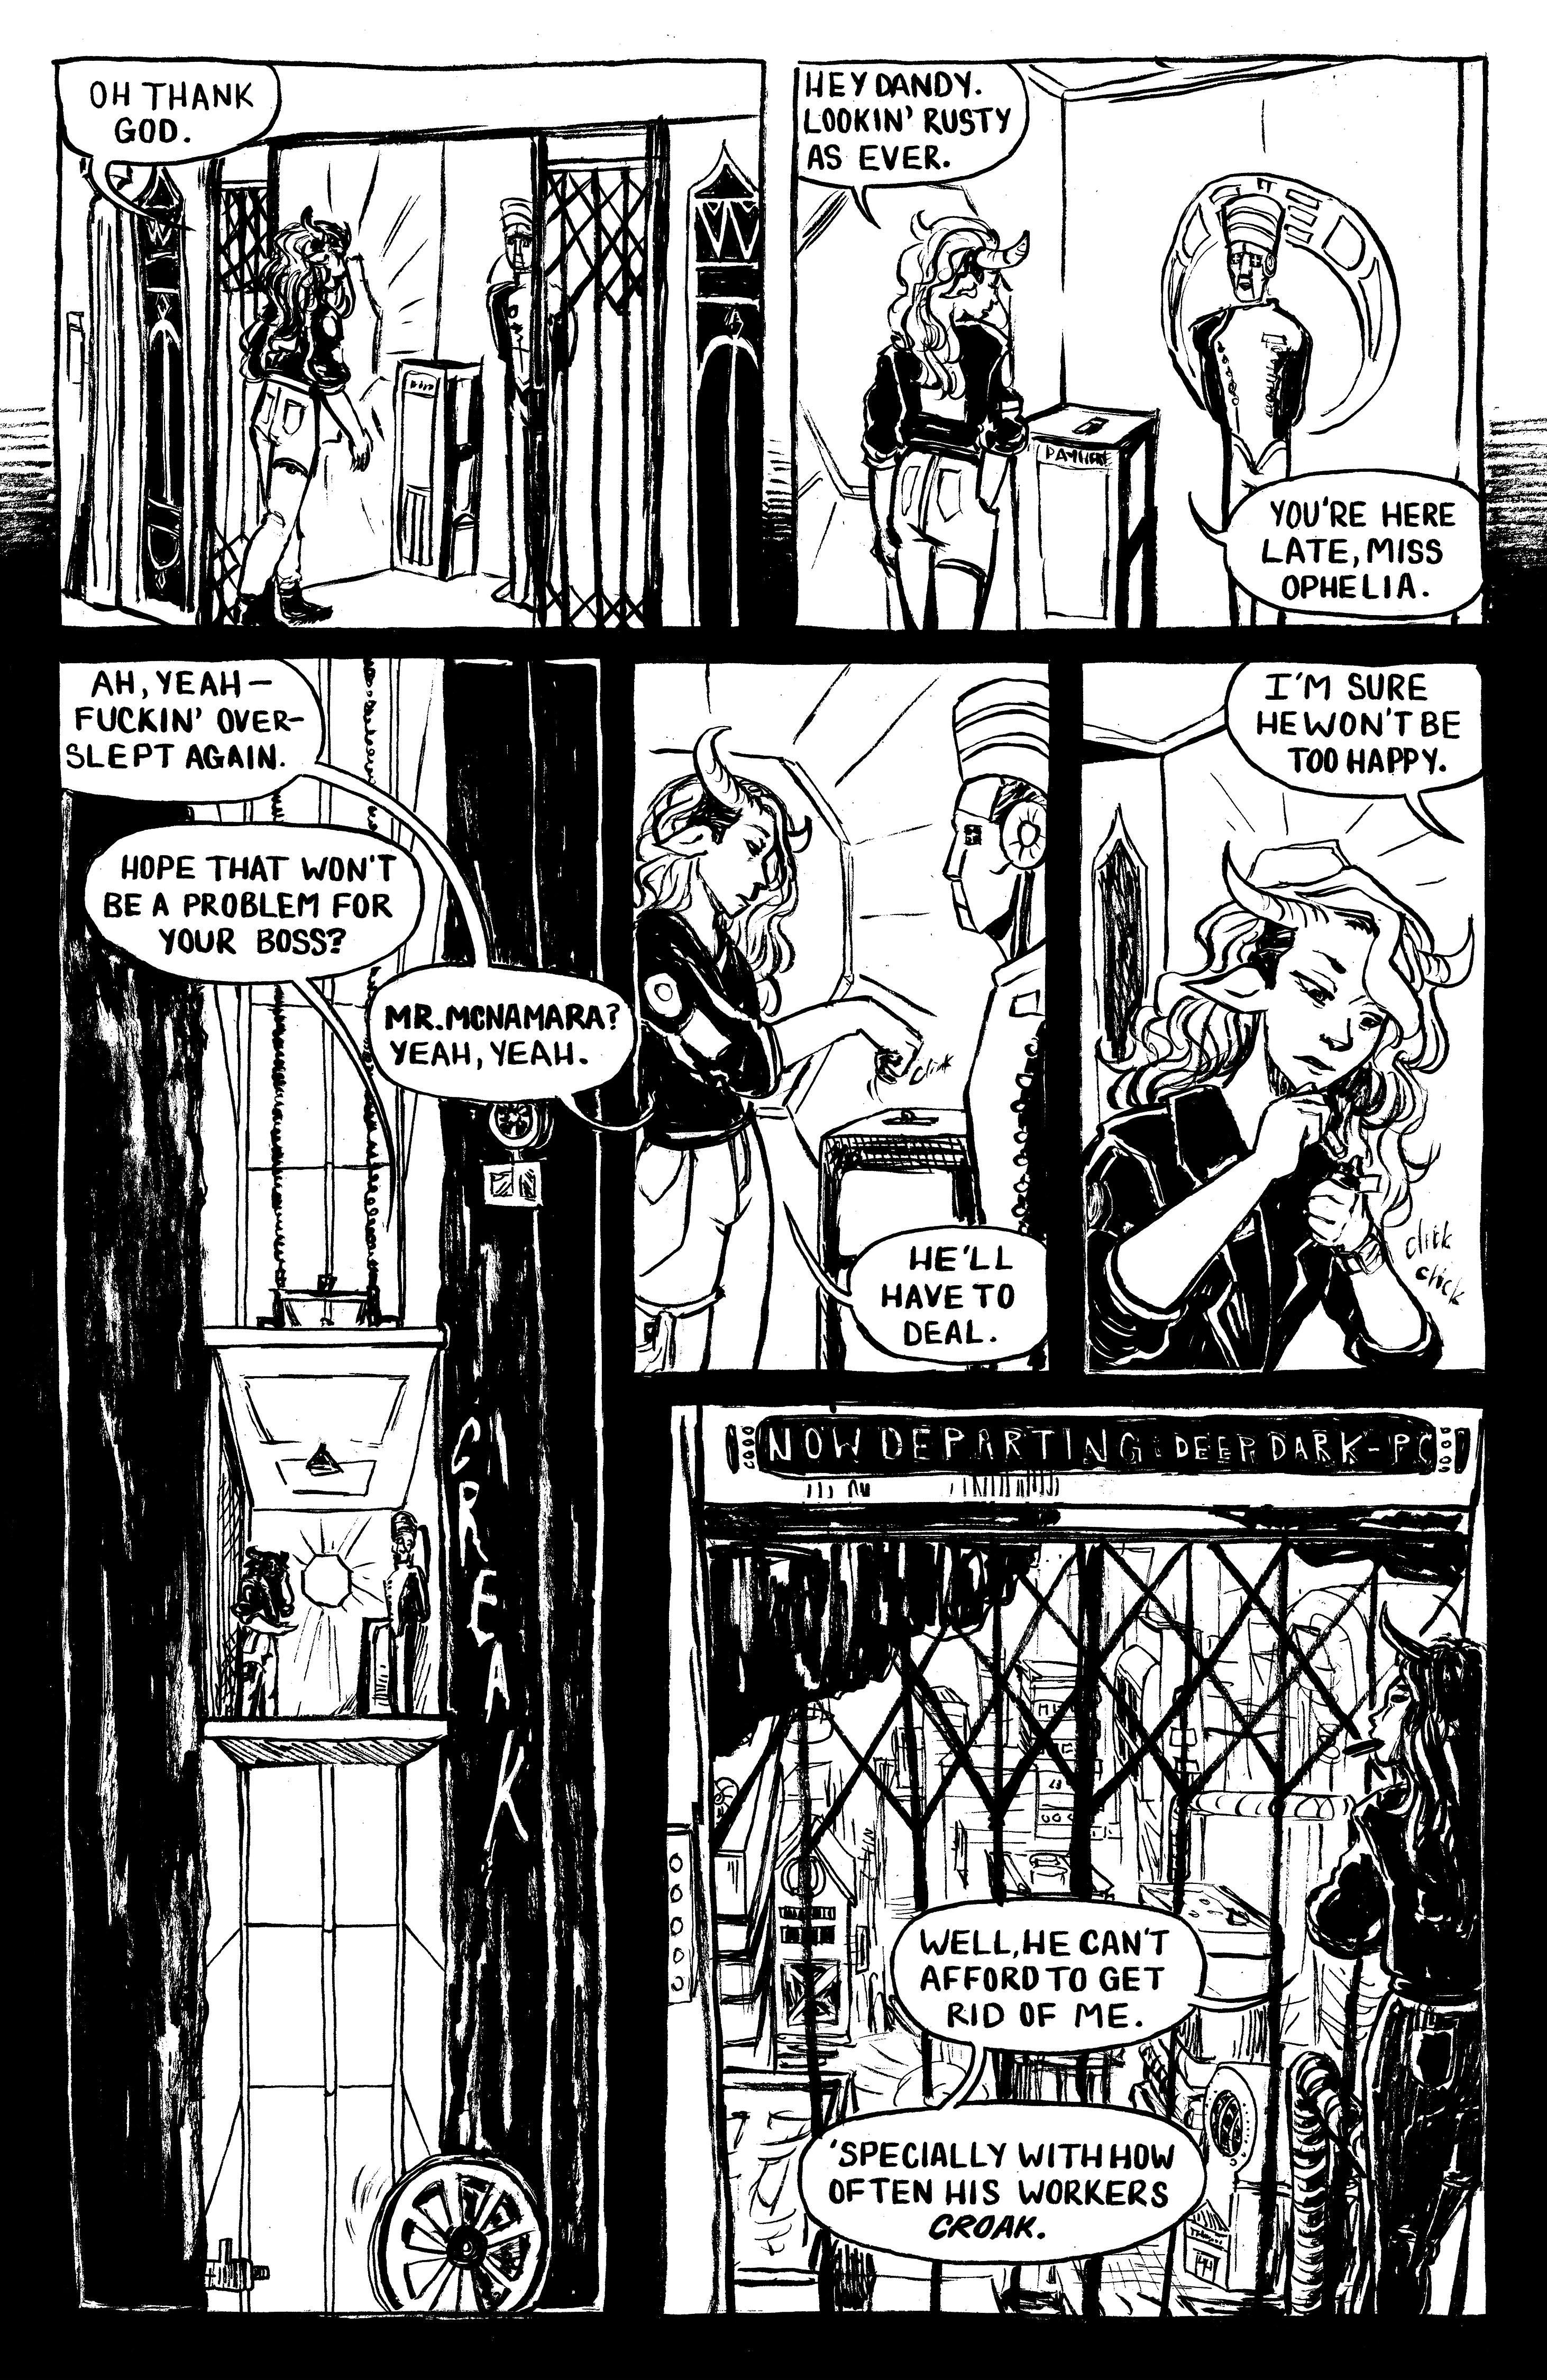 2 of 4 comic pages by Remy Burke